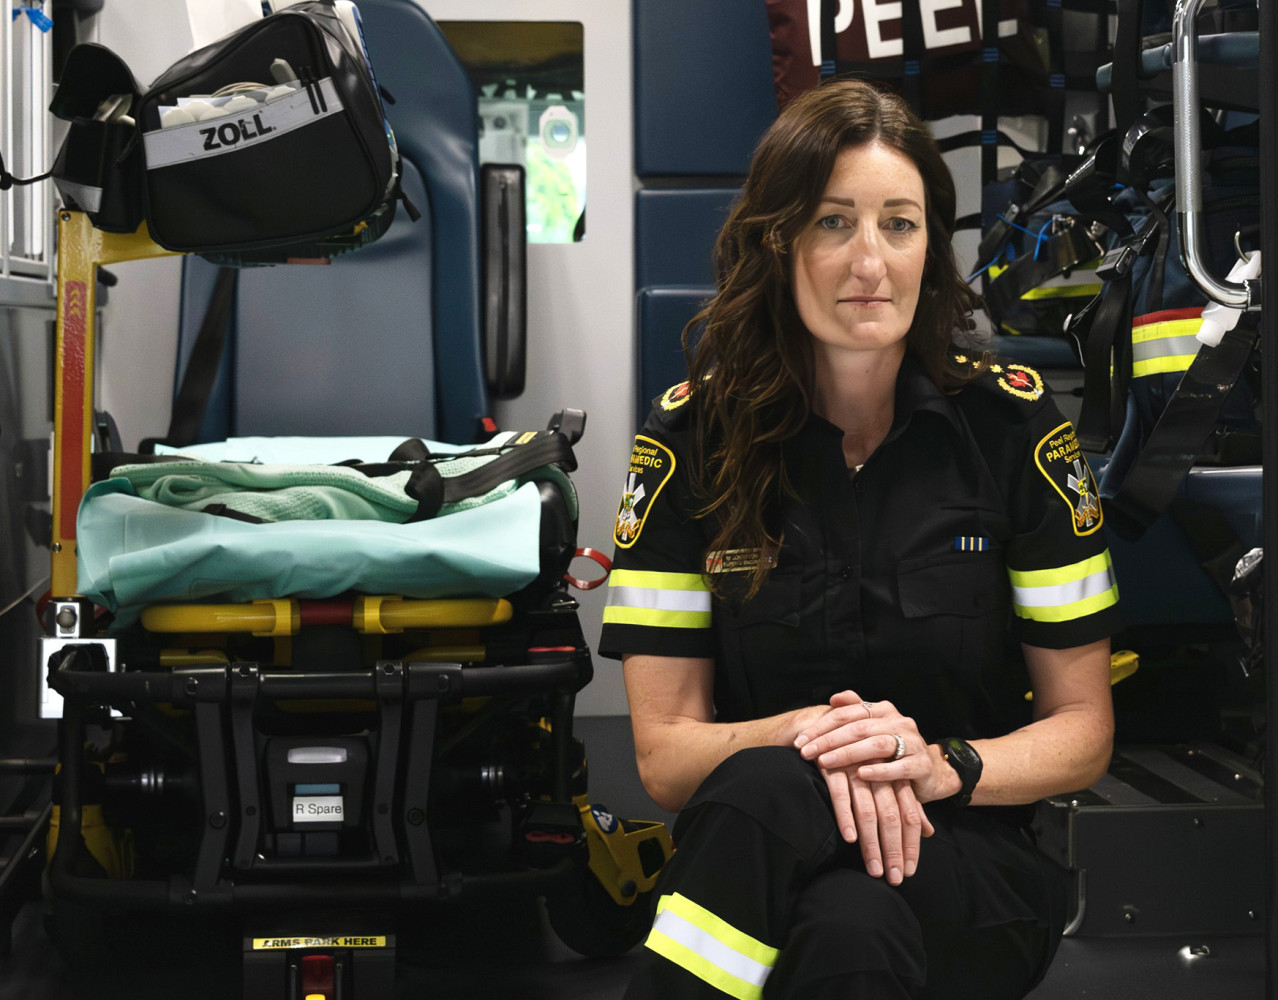 ‘I realized I was not alone’: Peel paramedic works to end violence plaguing first responders